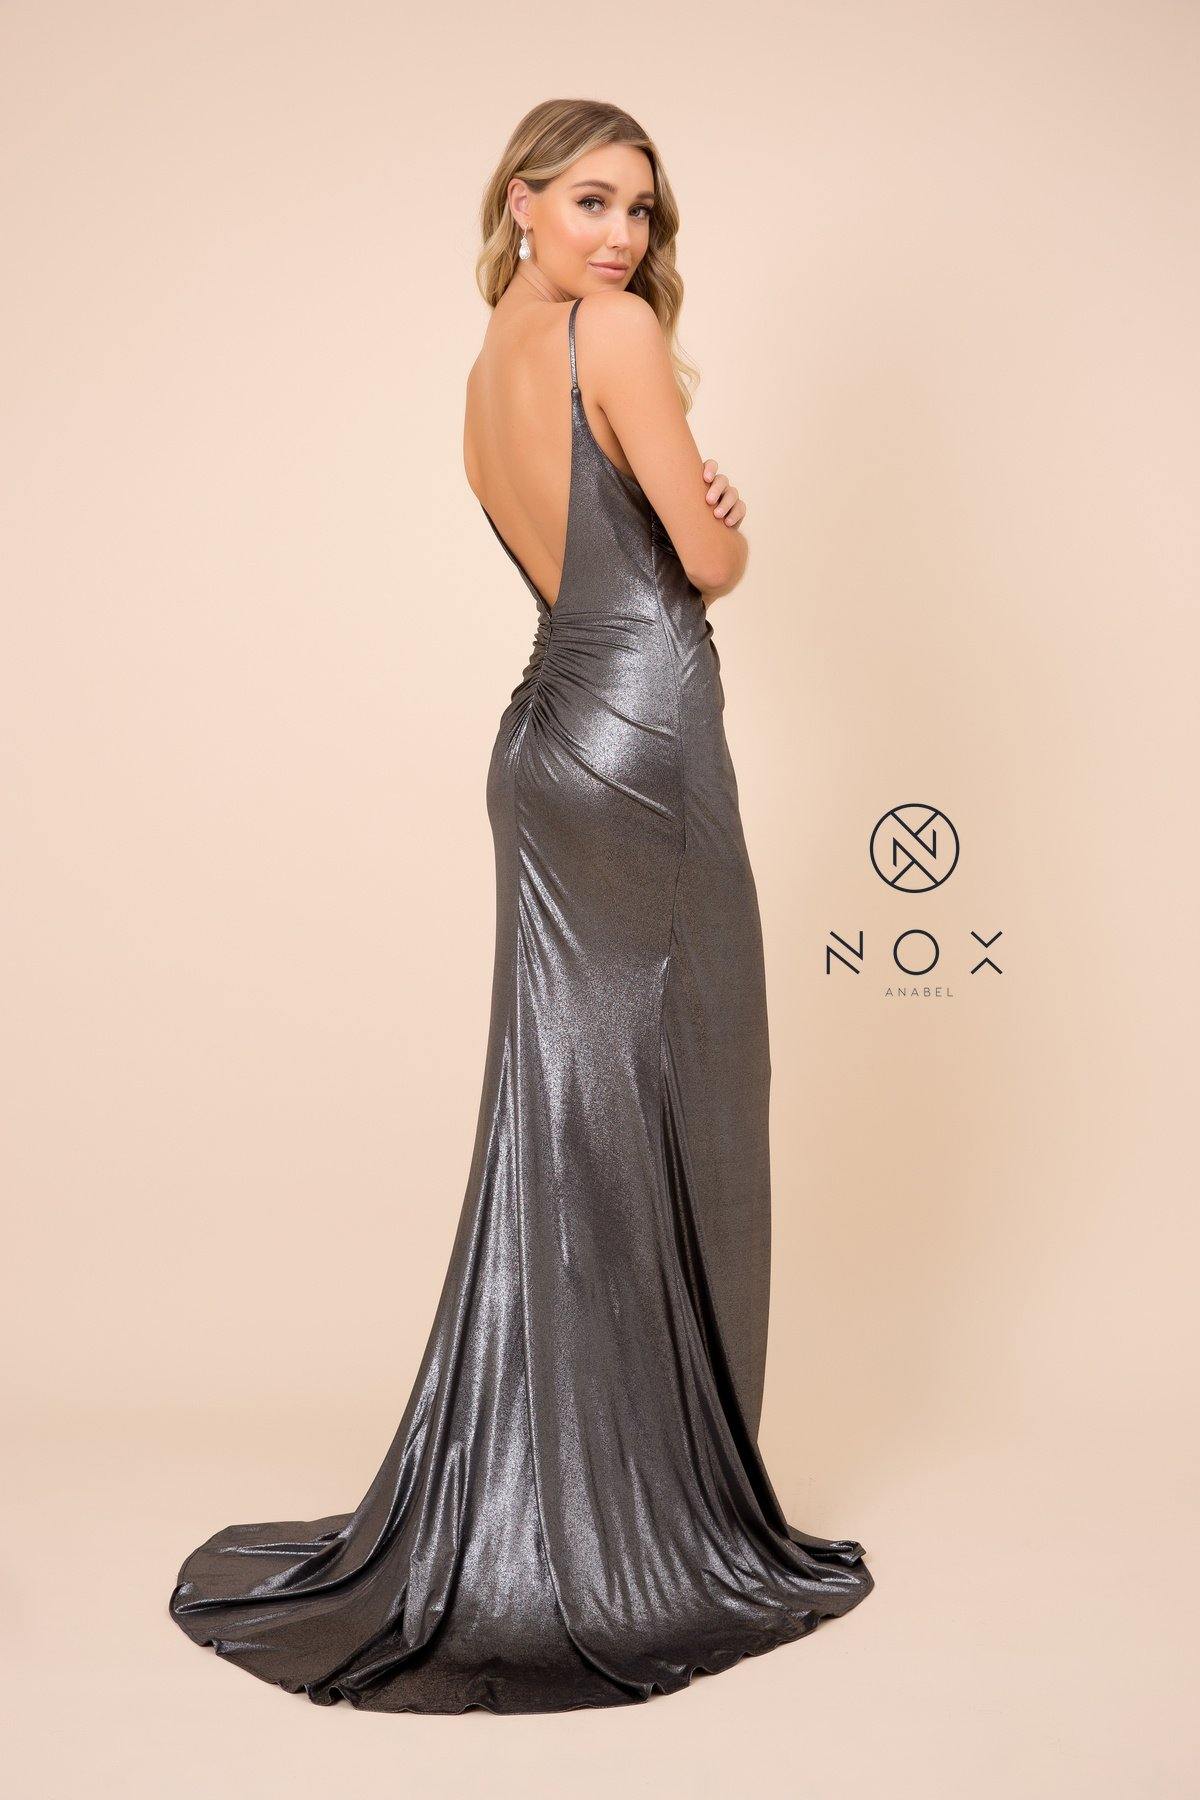 Long Formal Spaghetti Strap Fitted Metallic Dress - The Dress Outlet Nox Anabel